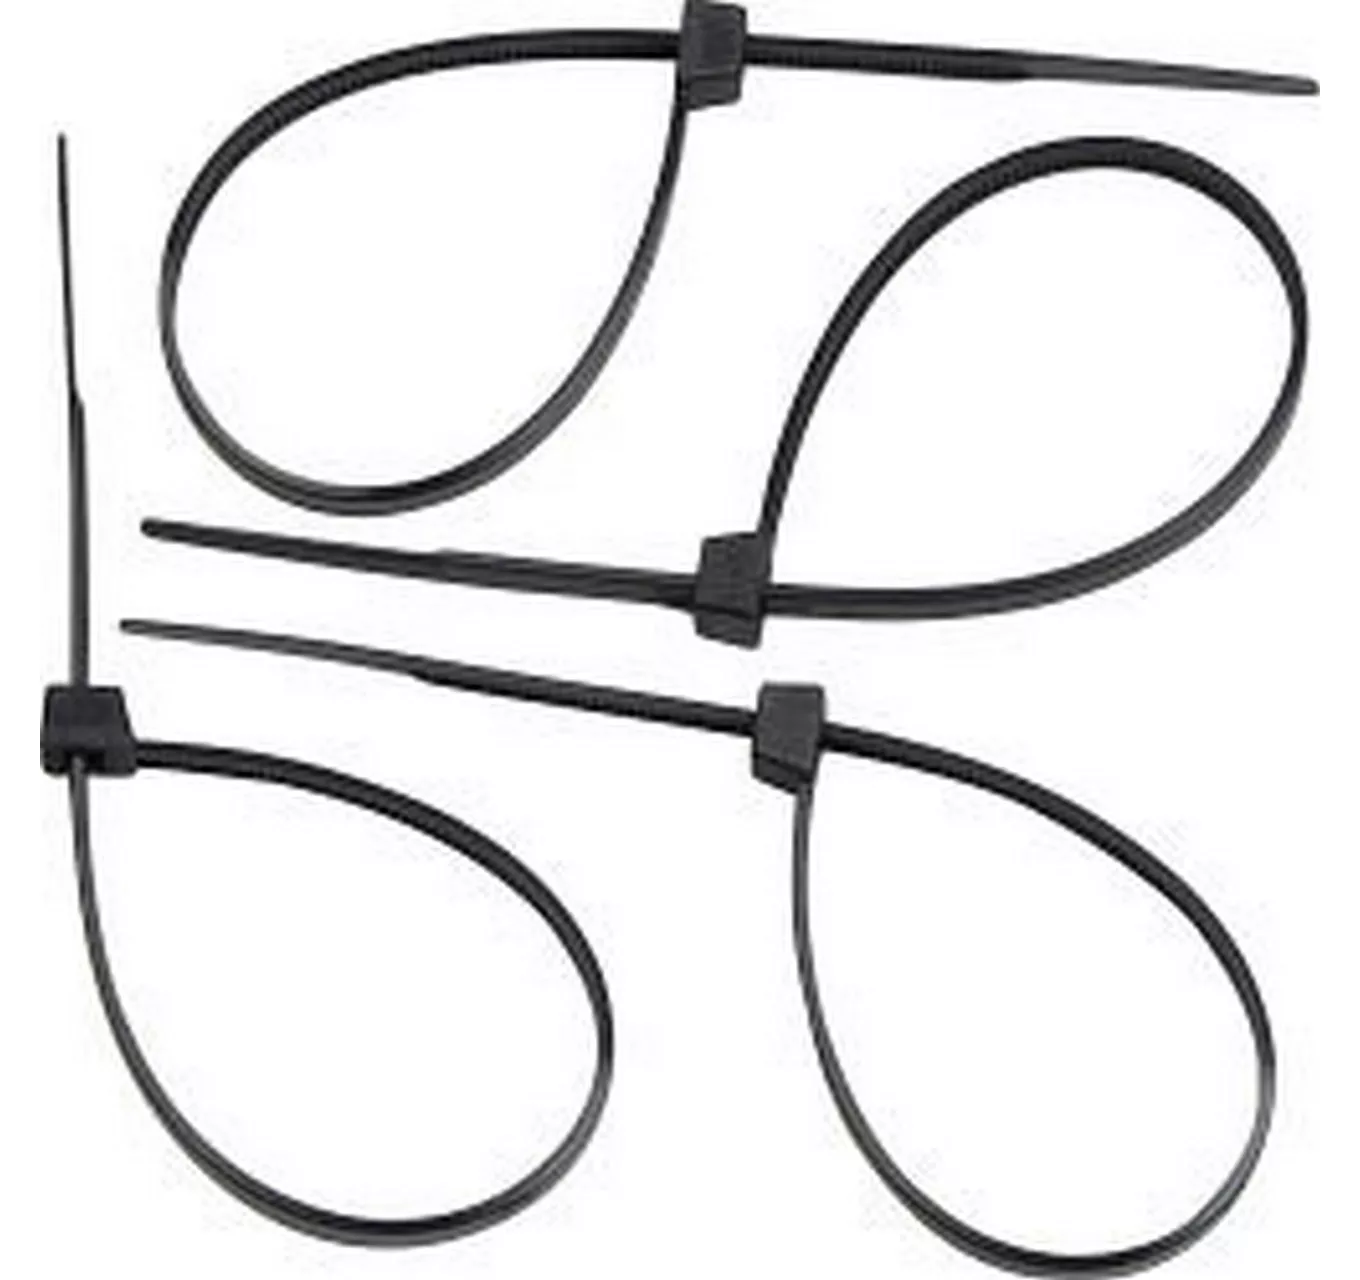 Cable Ties 200x5mm - 100pk